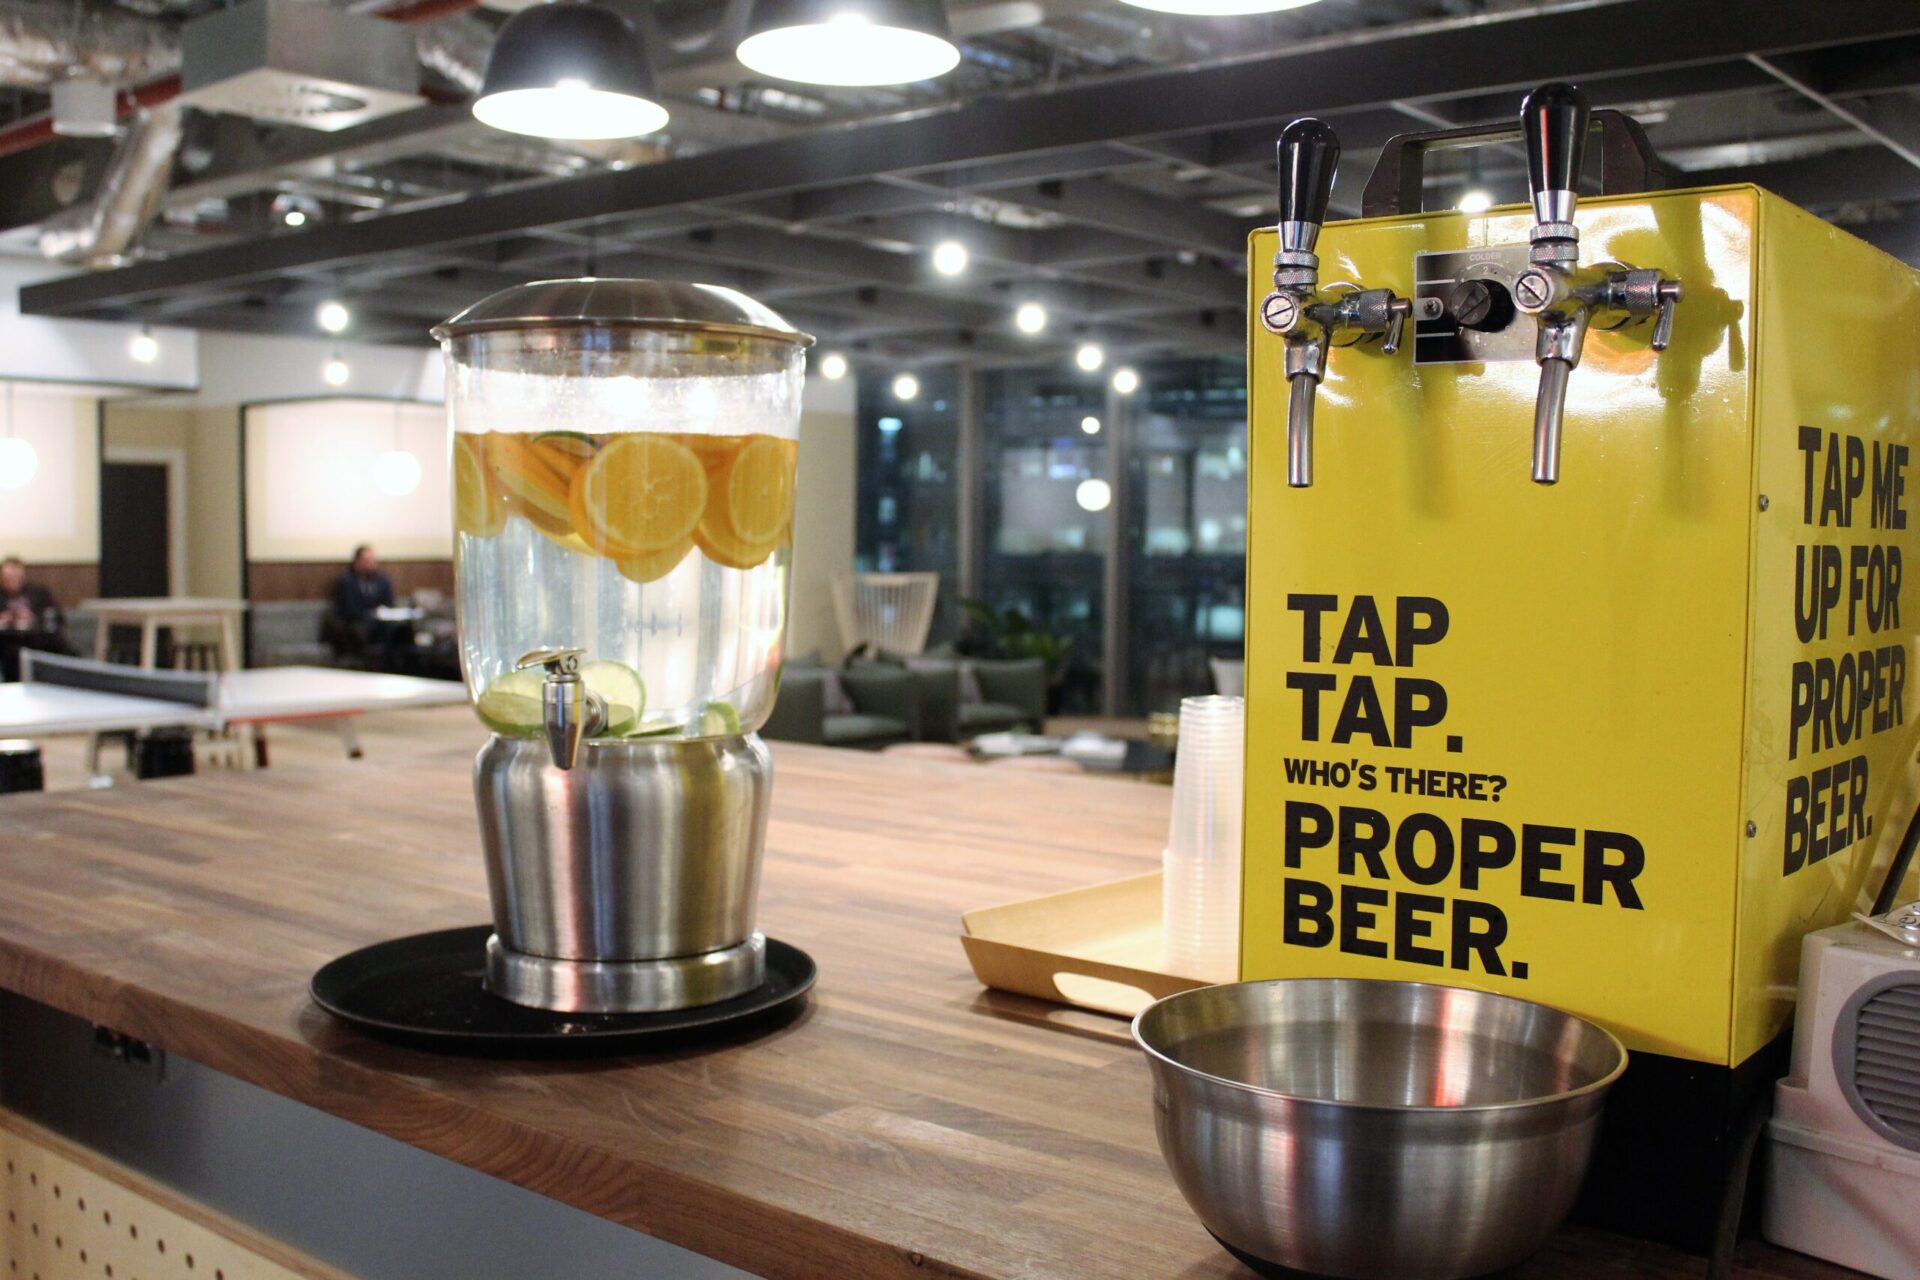 Shared kitchen facilities offer beer on tap at WeWork Spinningfields